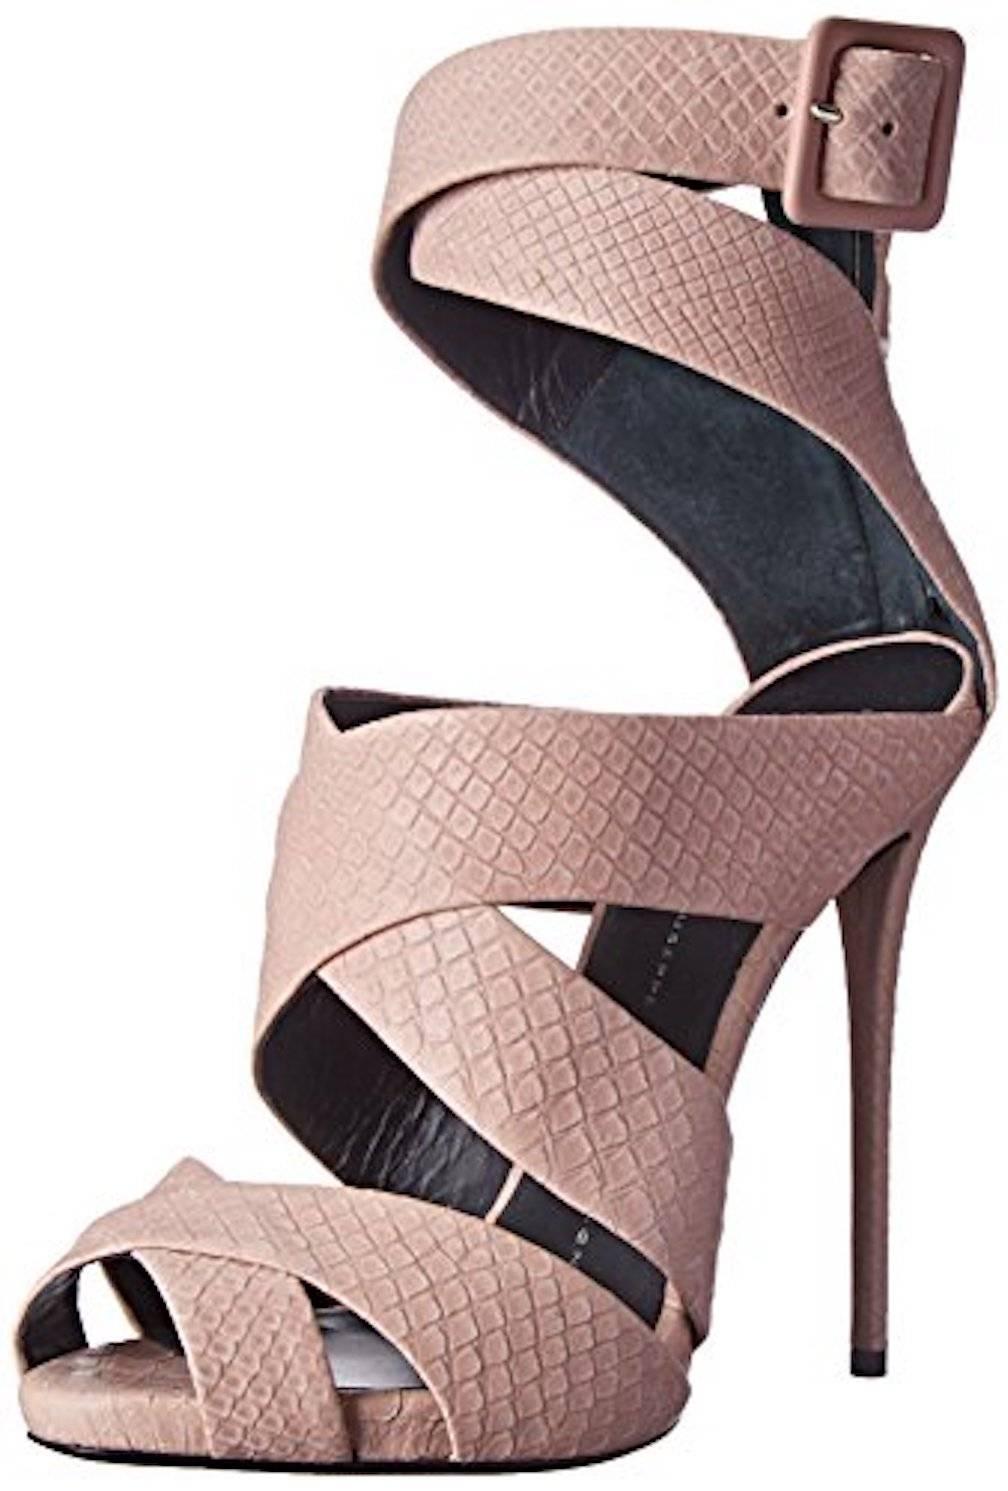 CURATOR'S NOTES

Last pair! Giuseppi Zanotti New & Sold Out Blush Python Leather Emboss Sandals Heels in Box 

Size IT 36
Python embossed leather
Buckle and zipper closure
Made in Italy
Heel height 4.75"
Includes original Giuseppe Zanotti